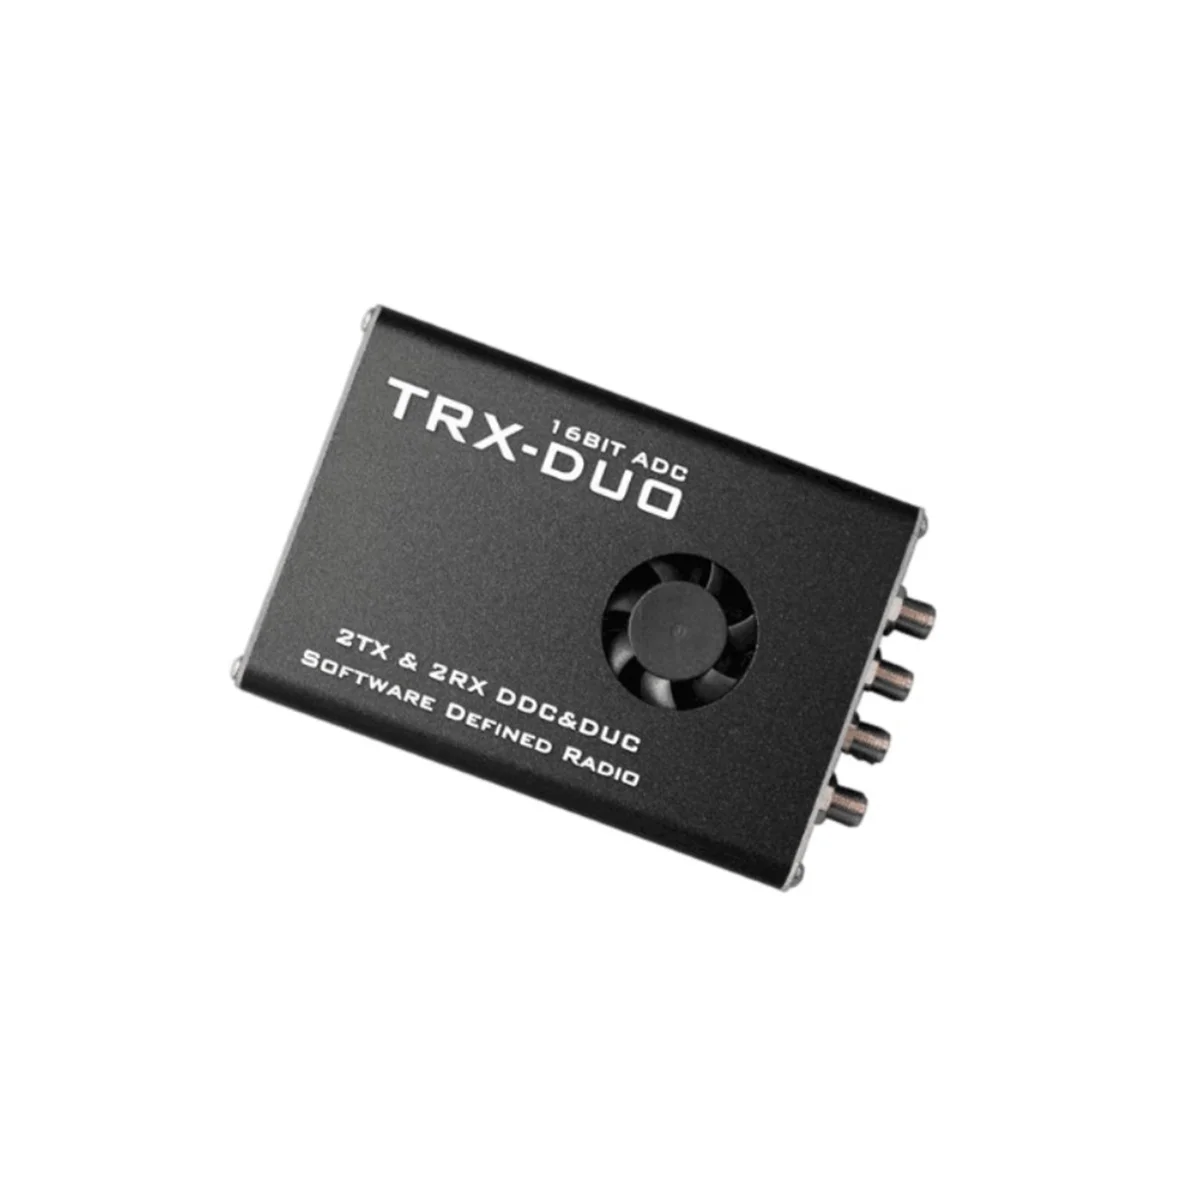 

TRX-DUO SDR Receiver Double 16Bit ADC ZYNQ7010 2TX & 2RX DDC DUC Compatible With Red Pitaya HDSDR SDR PowerSDR TRXUNO